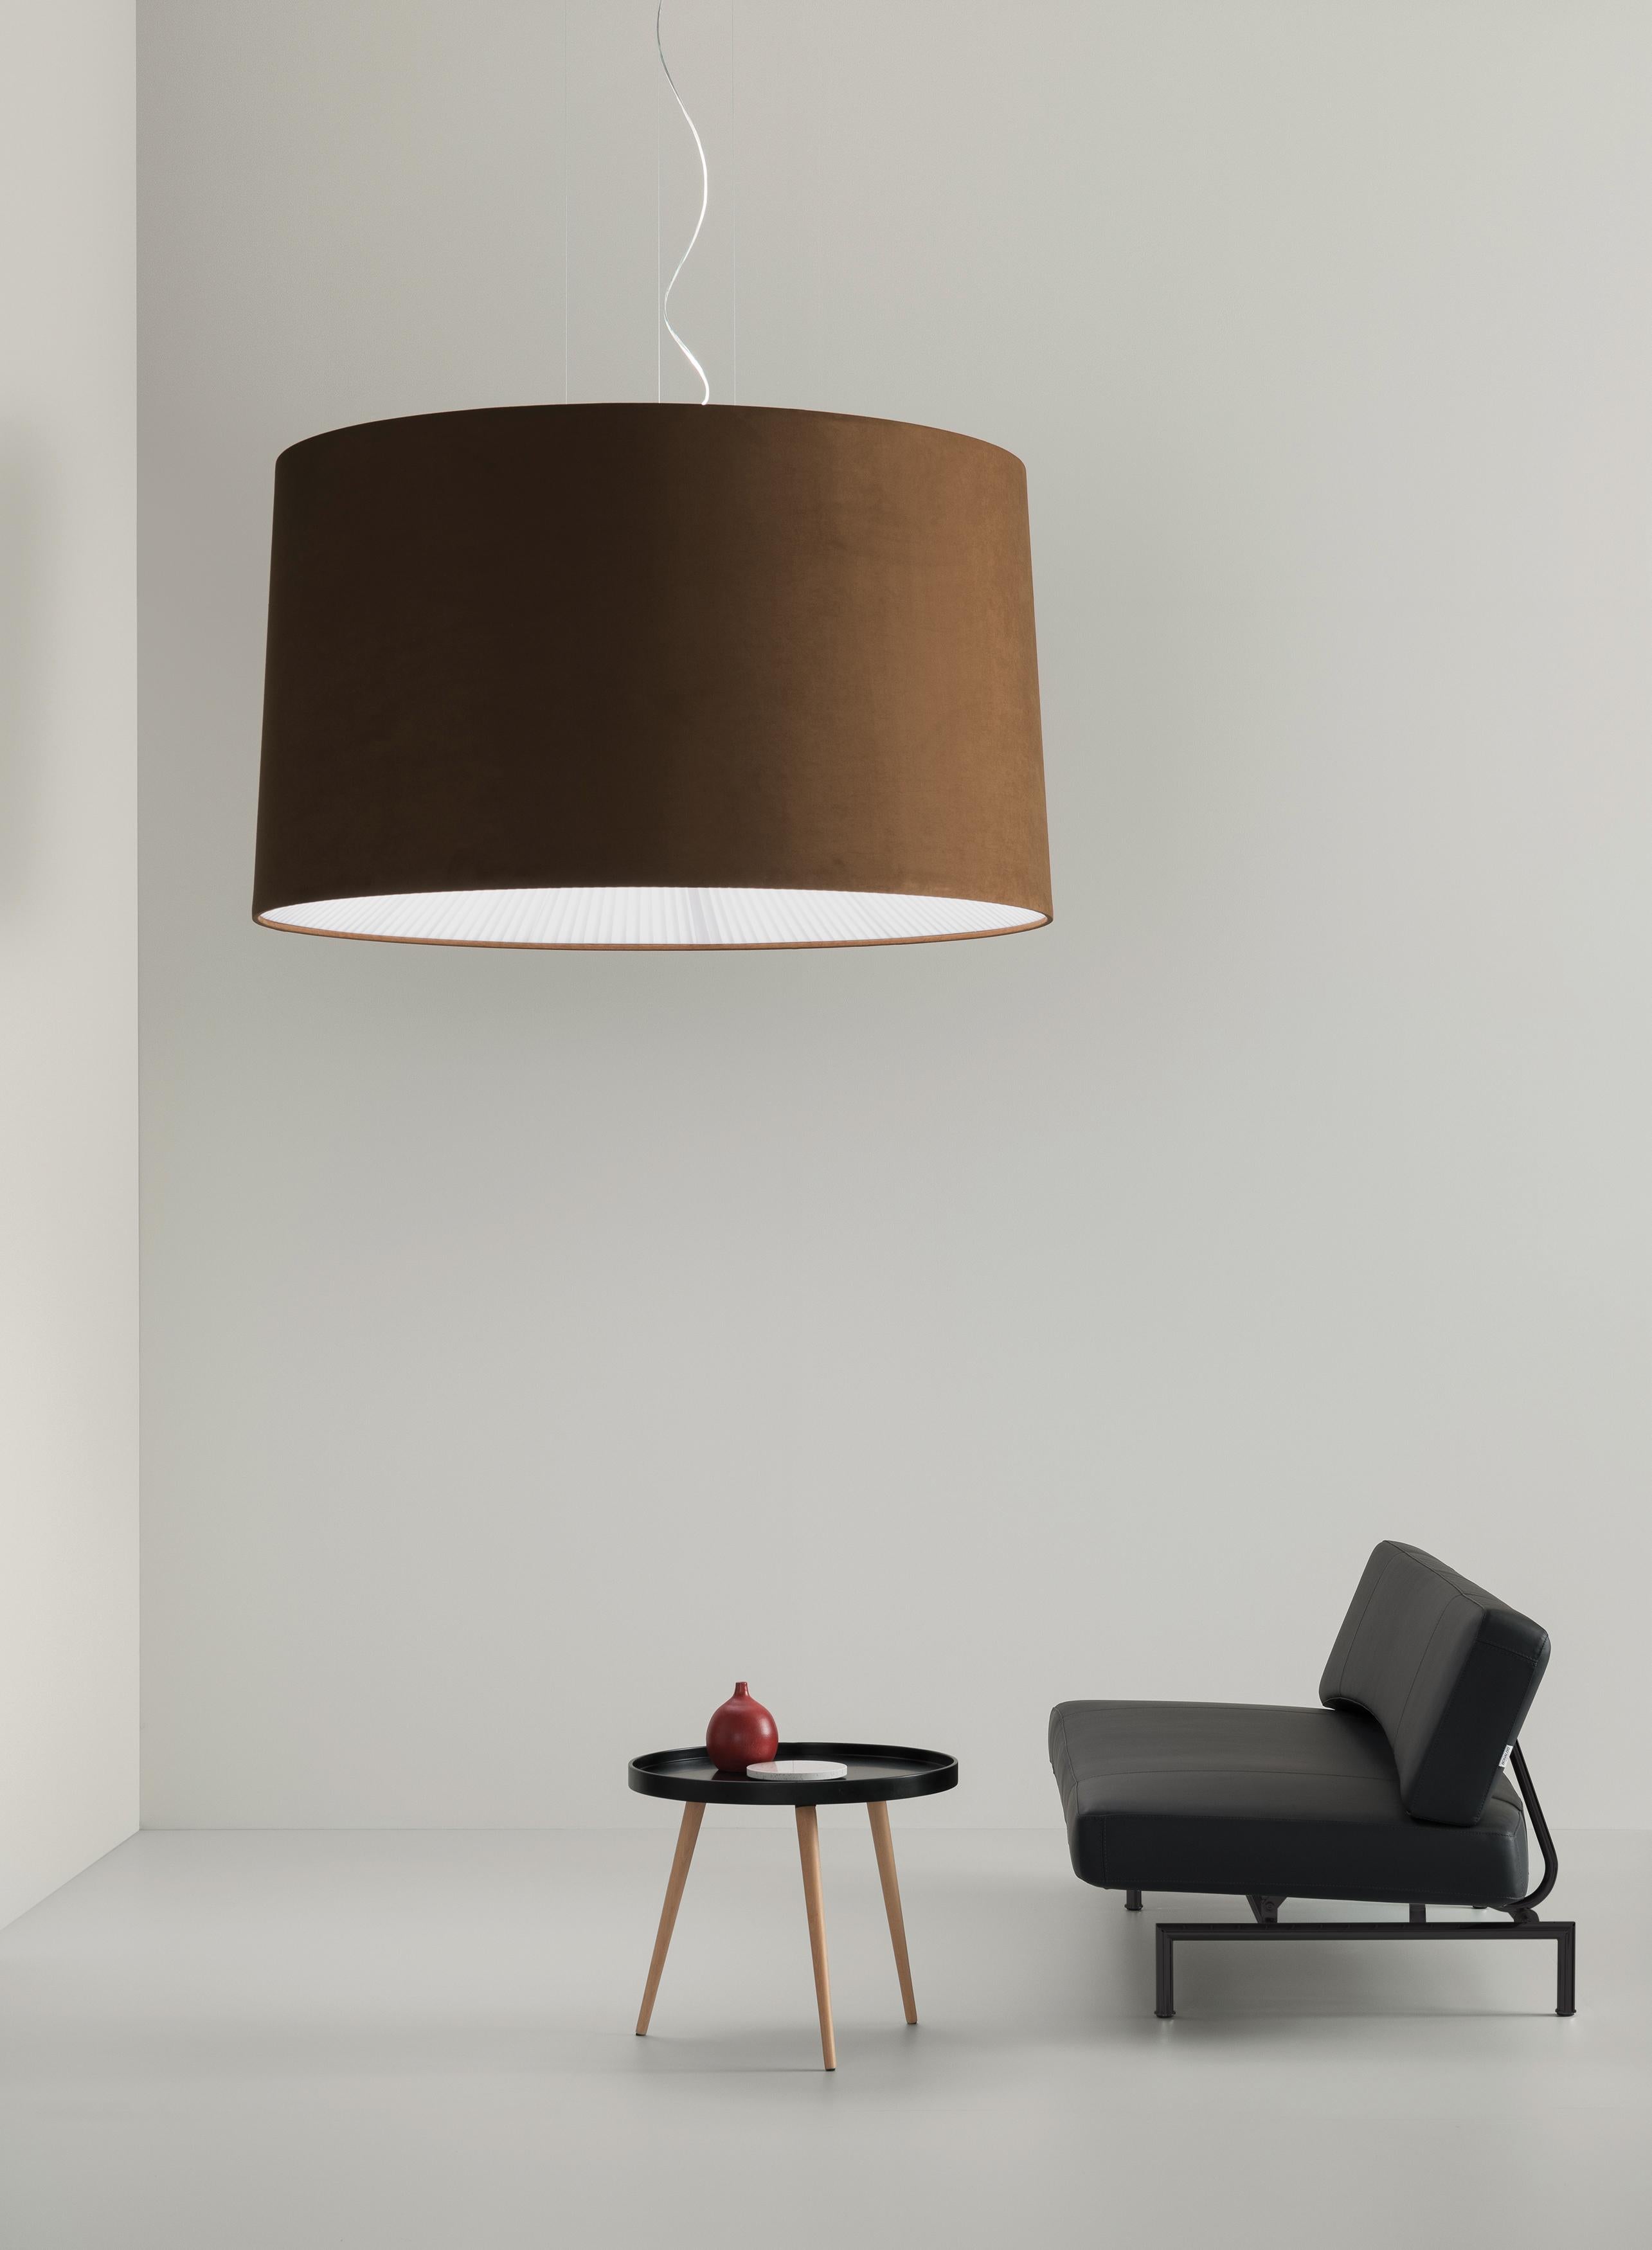 Axolight Large Velvet Pendant Lamp in Dark Blue by Manuel & Vanessa Vivian

The essential geometry, combined with the velvet-like texture, give life to Velvet. A collection full of charm and timeless elegance. The simplicity of its timeless design,